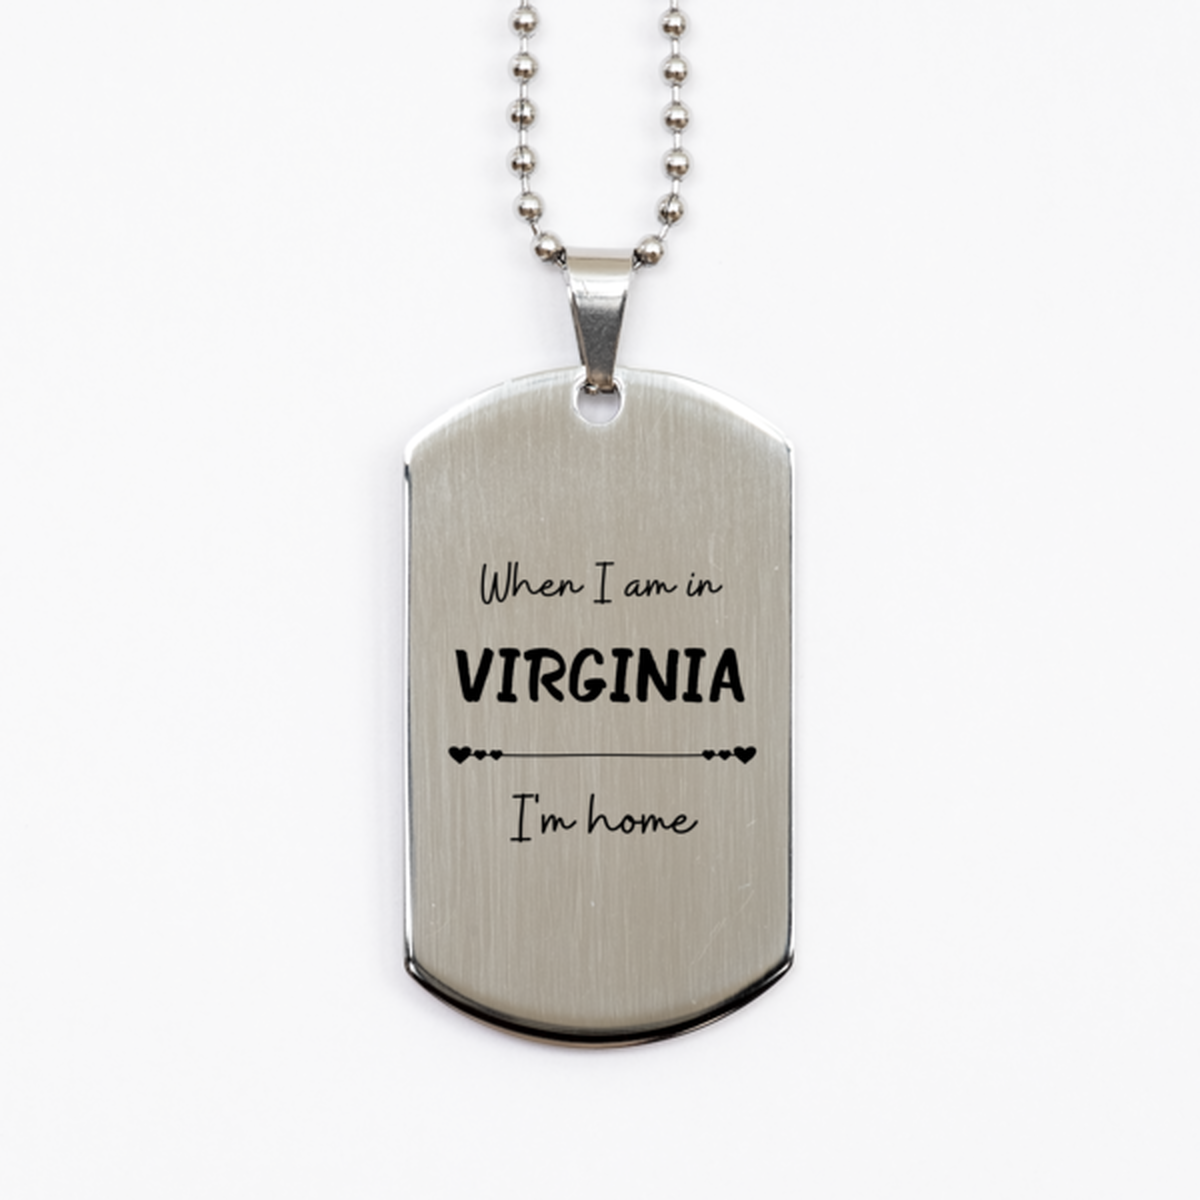 When I am in Virginia I'm home Silver Dog Tag, Cheap Gifts For Virginia, State Virginia Birthday Gifts for Friends Coworker